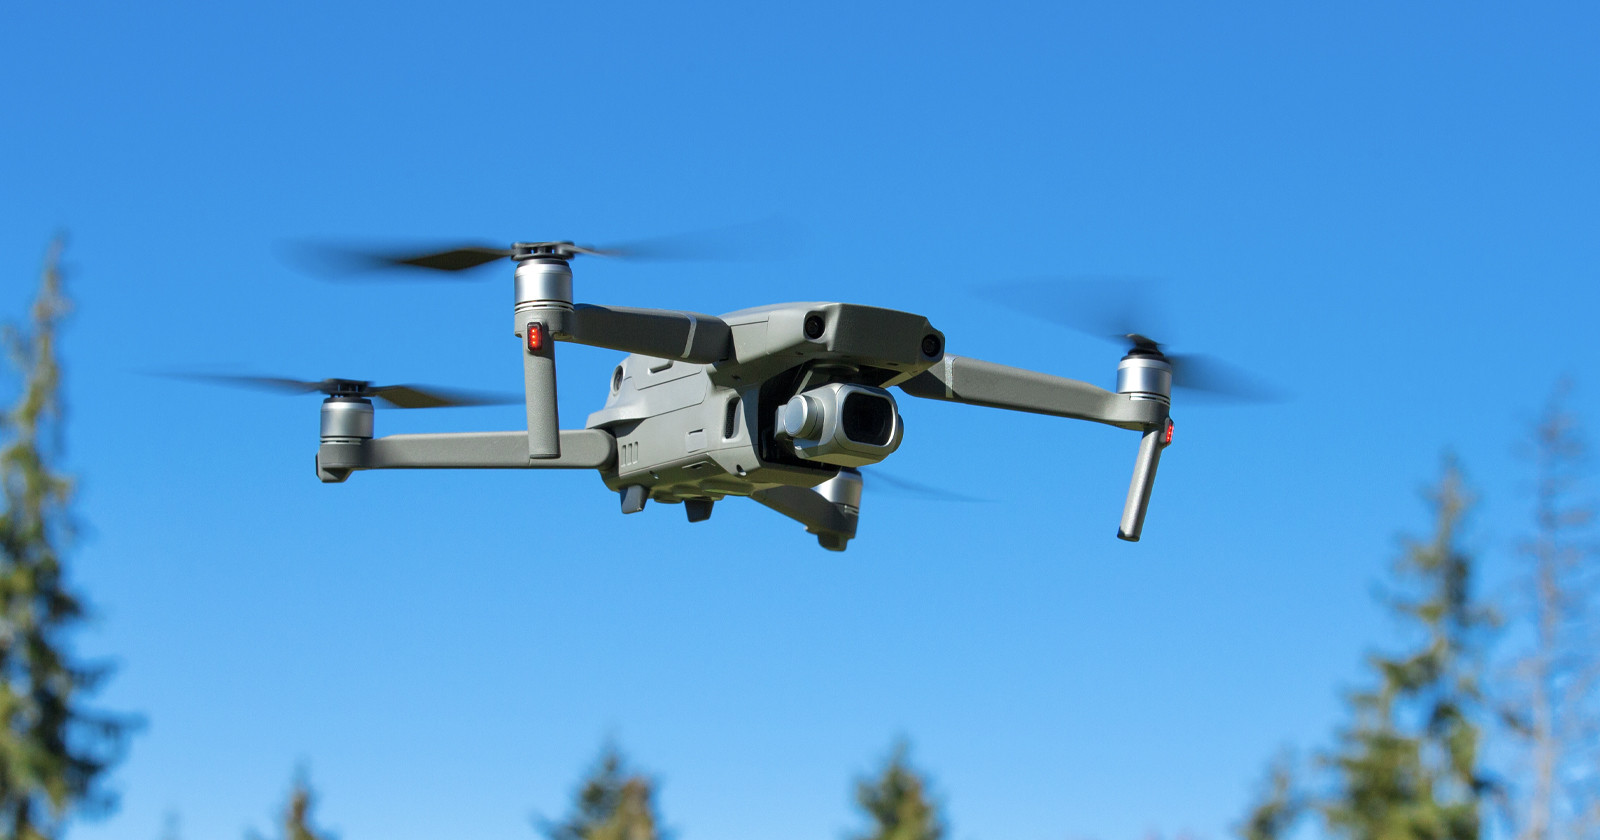  uae bans recreational drones after attack oil 